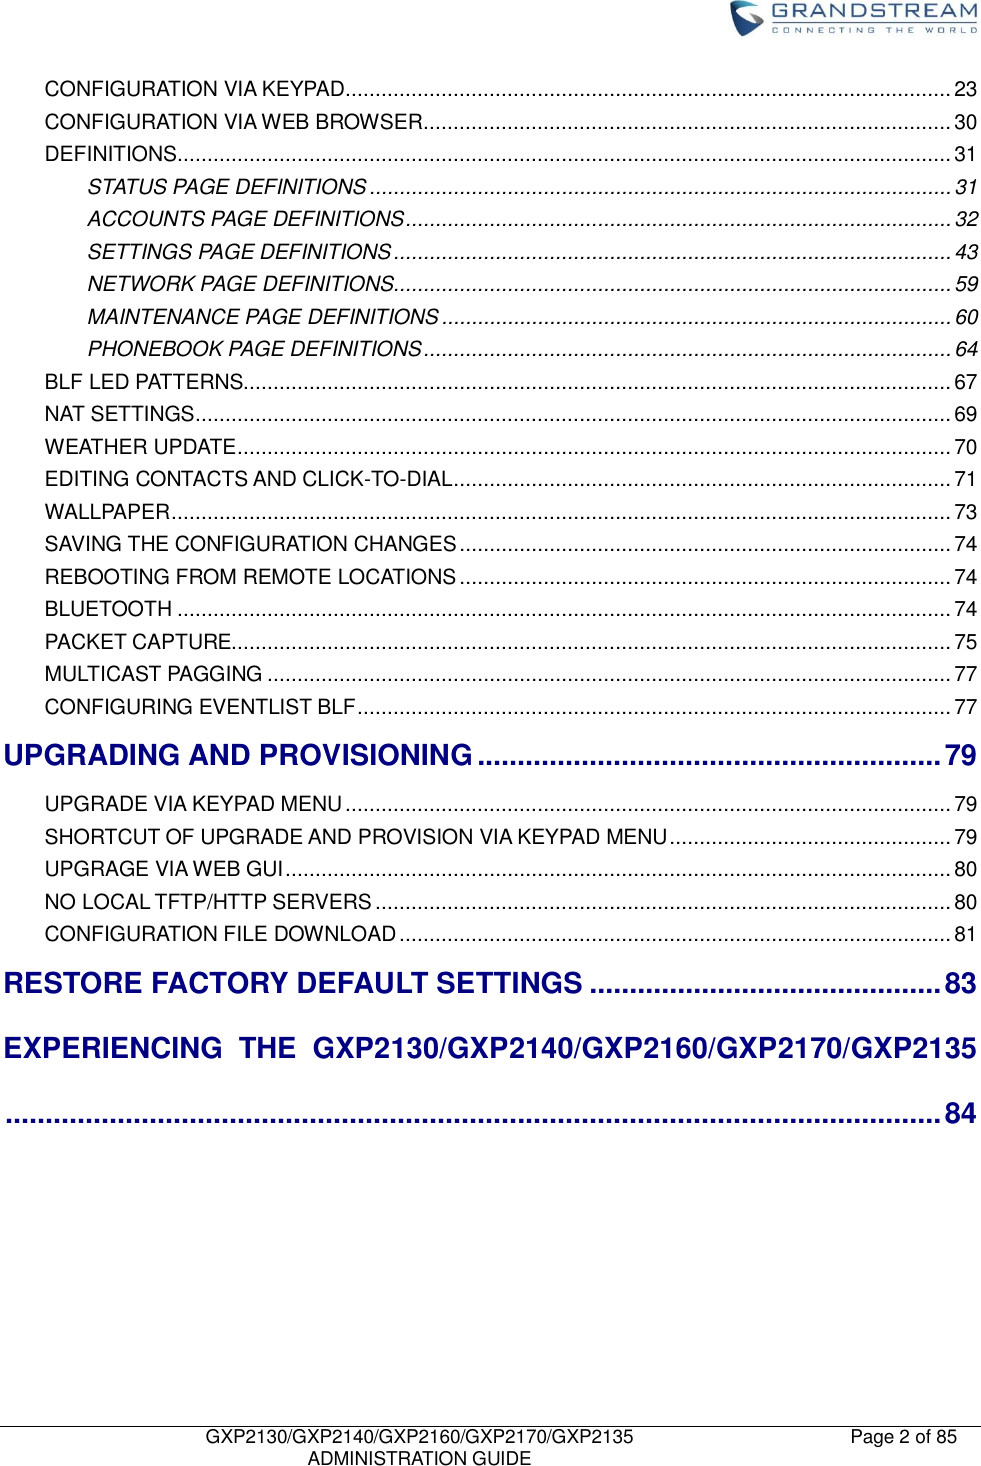    GXP2130/GXP2140/GXP2160/GXP2170/GXP2135   ADMINISTRATION GUIDE Page 2 of 85     CONFIGURATION VIA KEYPAD ..................................................................................................... 23 CONFIGURATION VIA WEB BROWSER ........................................................................................ 30 DEFINITIONS ................................................................................................................................. 31 STATUS PAGE DEFINITIONS ................................................................................................. 31 ACCOUNTS PAGE DEFINITIONS ........................................................................................... 32 SETTINGS PAGE DEFINITIONS ............................................................................................. 43 NETWORK PAGE DEFINITIONS............................................................................................. 59 MAINTENANCE PAGE DEFINITIONS ..................................................................................... 60 PHONEBOOK PAGE DEFINITIONS ........................................................................................ 64 BLF LED PATTERNS...................................................................................................................... 67 NAT SETTINGS .............................................................................................................................. 69 WEATHER UPDATE ....................................................................................................................... 70 EDITING CONTACTS AND CLICK-TO-DIAL ................................................................................... 71 WALLPAPER .................................................................................................................................. 73 SAVING THE CONFIGURATION CHANGES .................................................................................. 74 REBOOTING FROM REMOTE LOCATIONS .................................................................................. 74 BLUETOOTH ................................................................................................................................. 74 PACKET CAPTURE........................................................................................................................ 75 MULTICAST PAGGING .................................................................................................................. 77 CONFIGURING EVENTLIST BLF ................................................................................................... 77 UPGRADING AND PROVISIONING .......................................................... 79 UPGRADE VIA KEYPAD MENU ..................................................................................................... 79 SHORTCUT OF UPGRADE AND PROVISION VIA KEYPAD MENU ............................................... 79 UPGRAGE VIA WEB GUI ............................................................................................................... 80 NO LOCAL TFTP/HTTP SERVERS ................................................................................................ 80 CONFIGURATION FILE DOWNLOAD ............................................................................................ 81 RESTORE FACTORY DEFAULT SETTINGS ............................................ 83 EXPERIENCING  THE  GXP2130/GXP2140/GXP2160/GXP2170/GXP2135 ..................................................................................................................... 84        